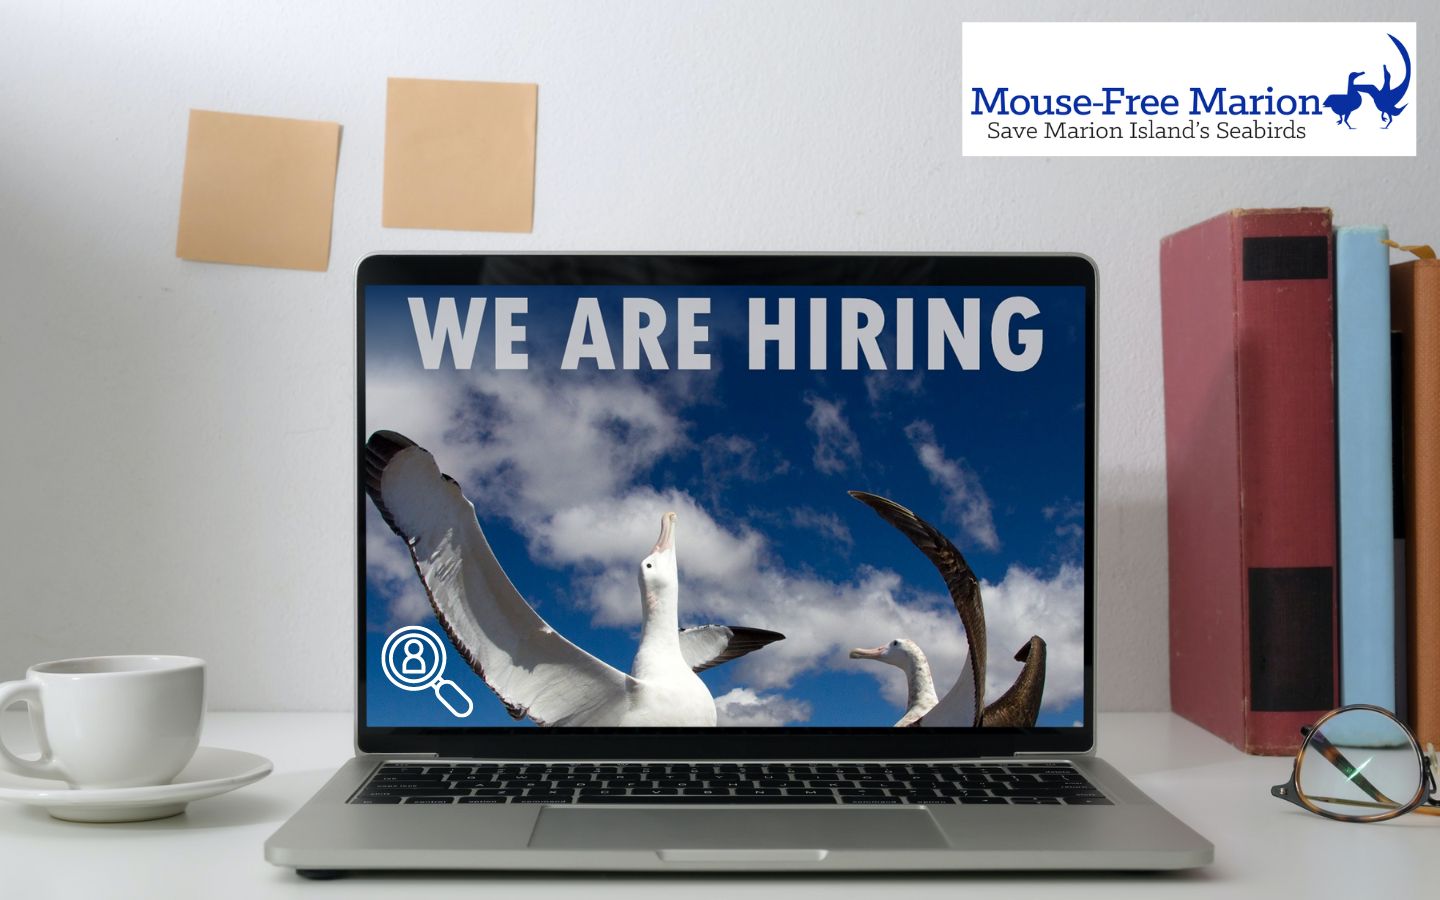 The Mouse-Free Marion Project is hiring